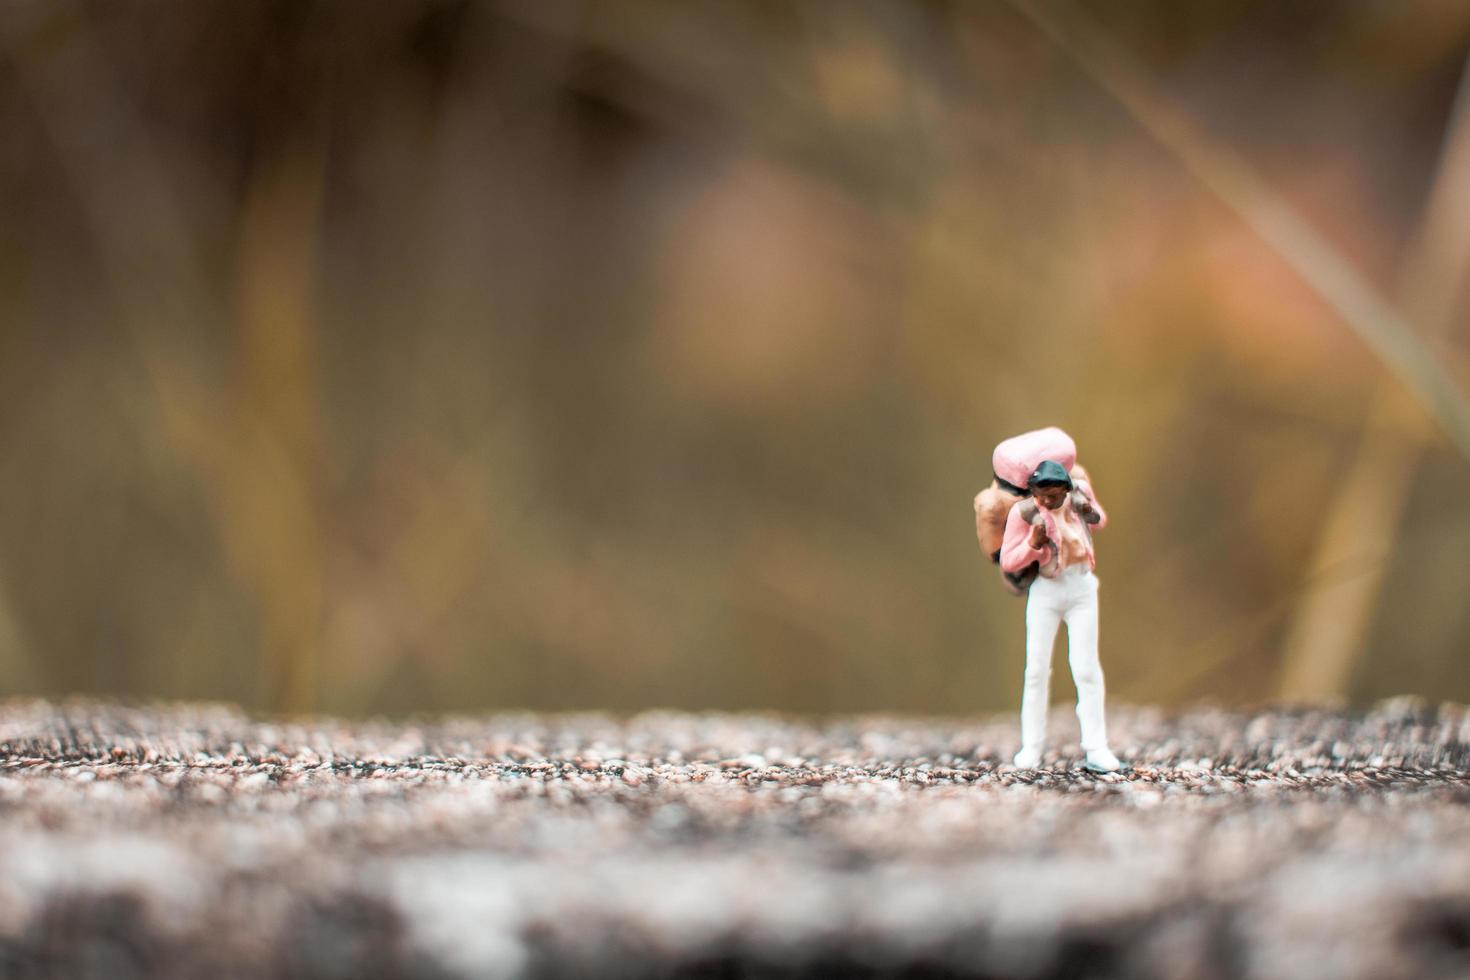 Miniature backpacker standing on a concrete floor with a bokeh nature background photo